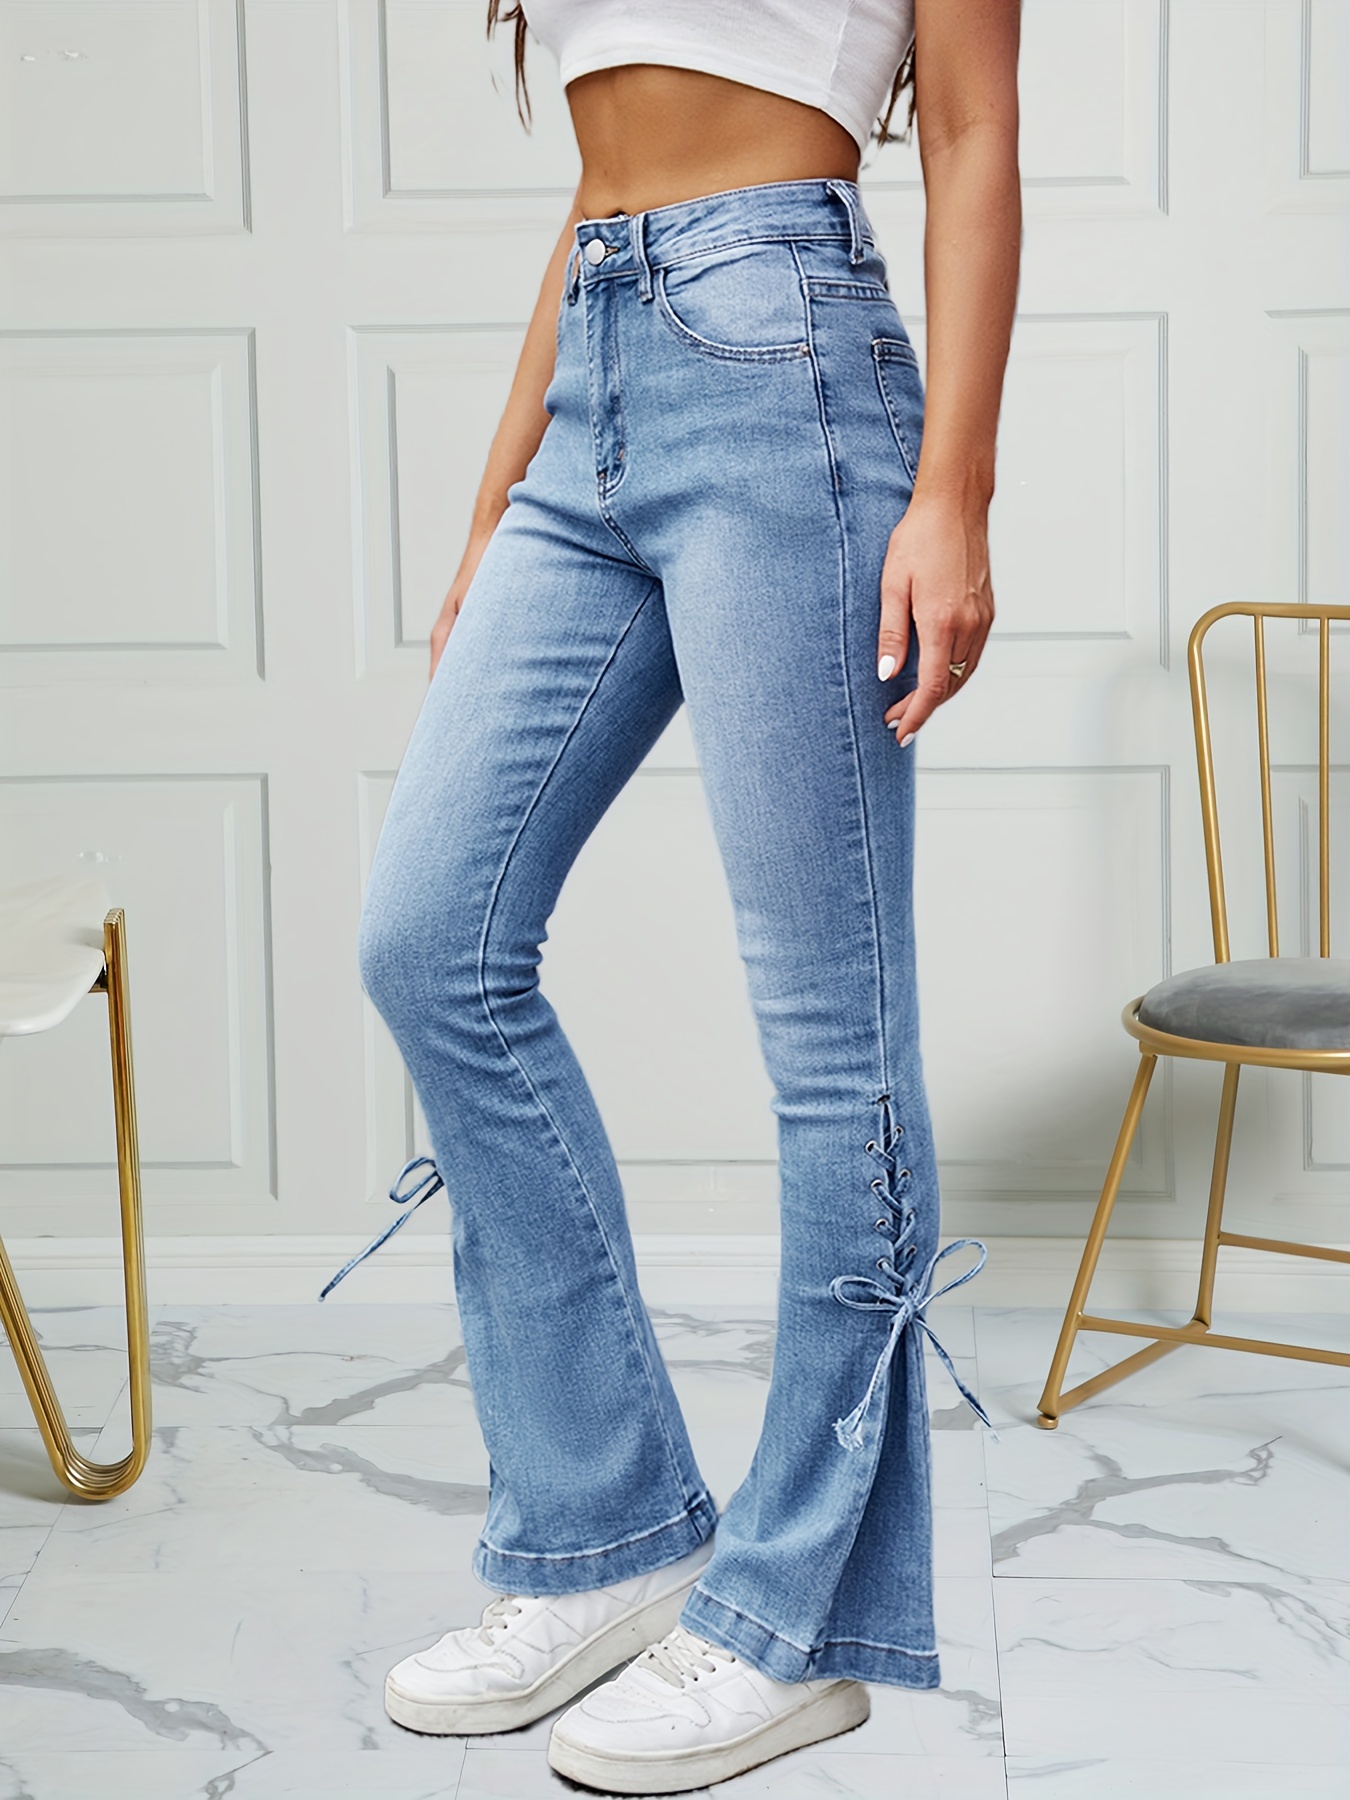 Blue Ripped Holes Flared Jeans, Lace Up Distressed Bell Bottom Casual Denim  Pants, Women's Denim Jeans & Clothing